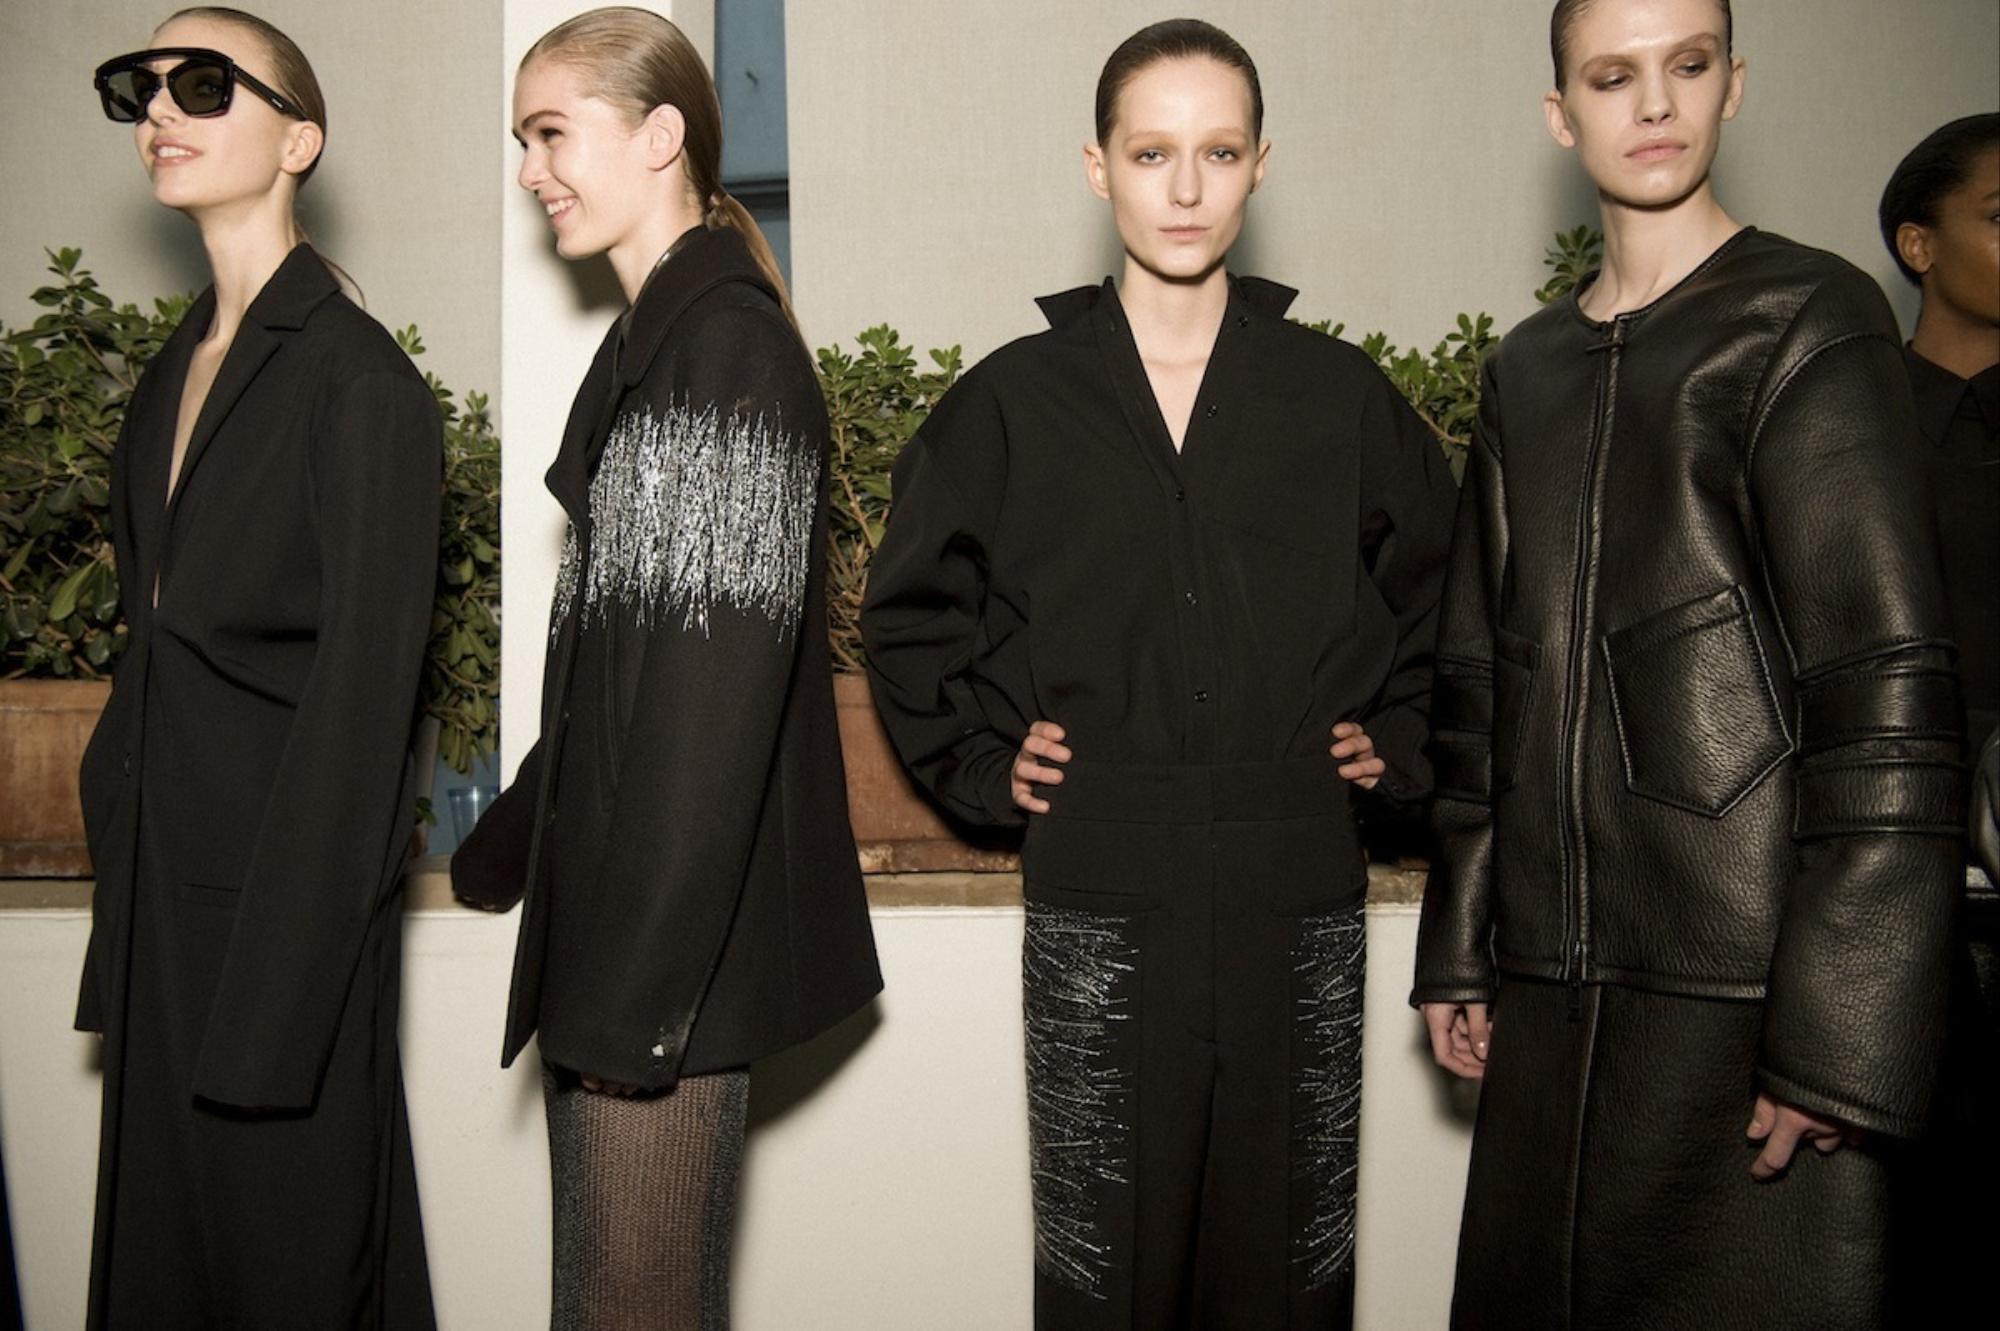 jil sander go pure and precise for autumn/winter 16 | look | i-D